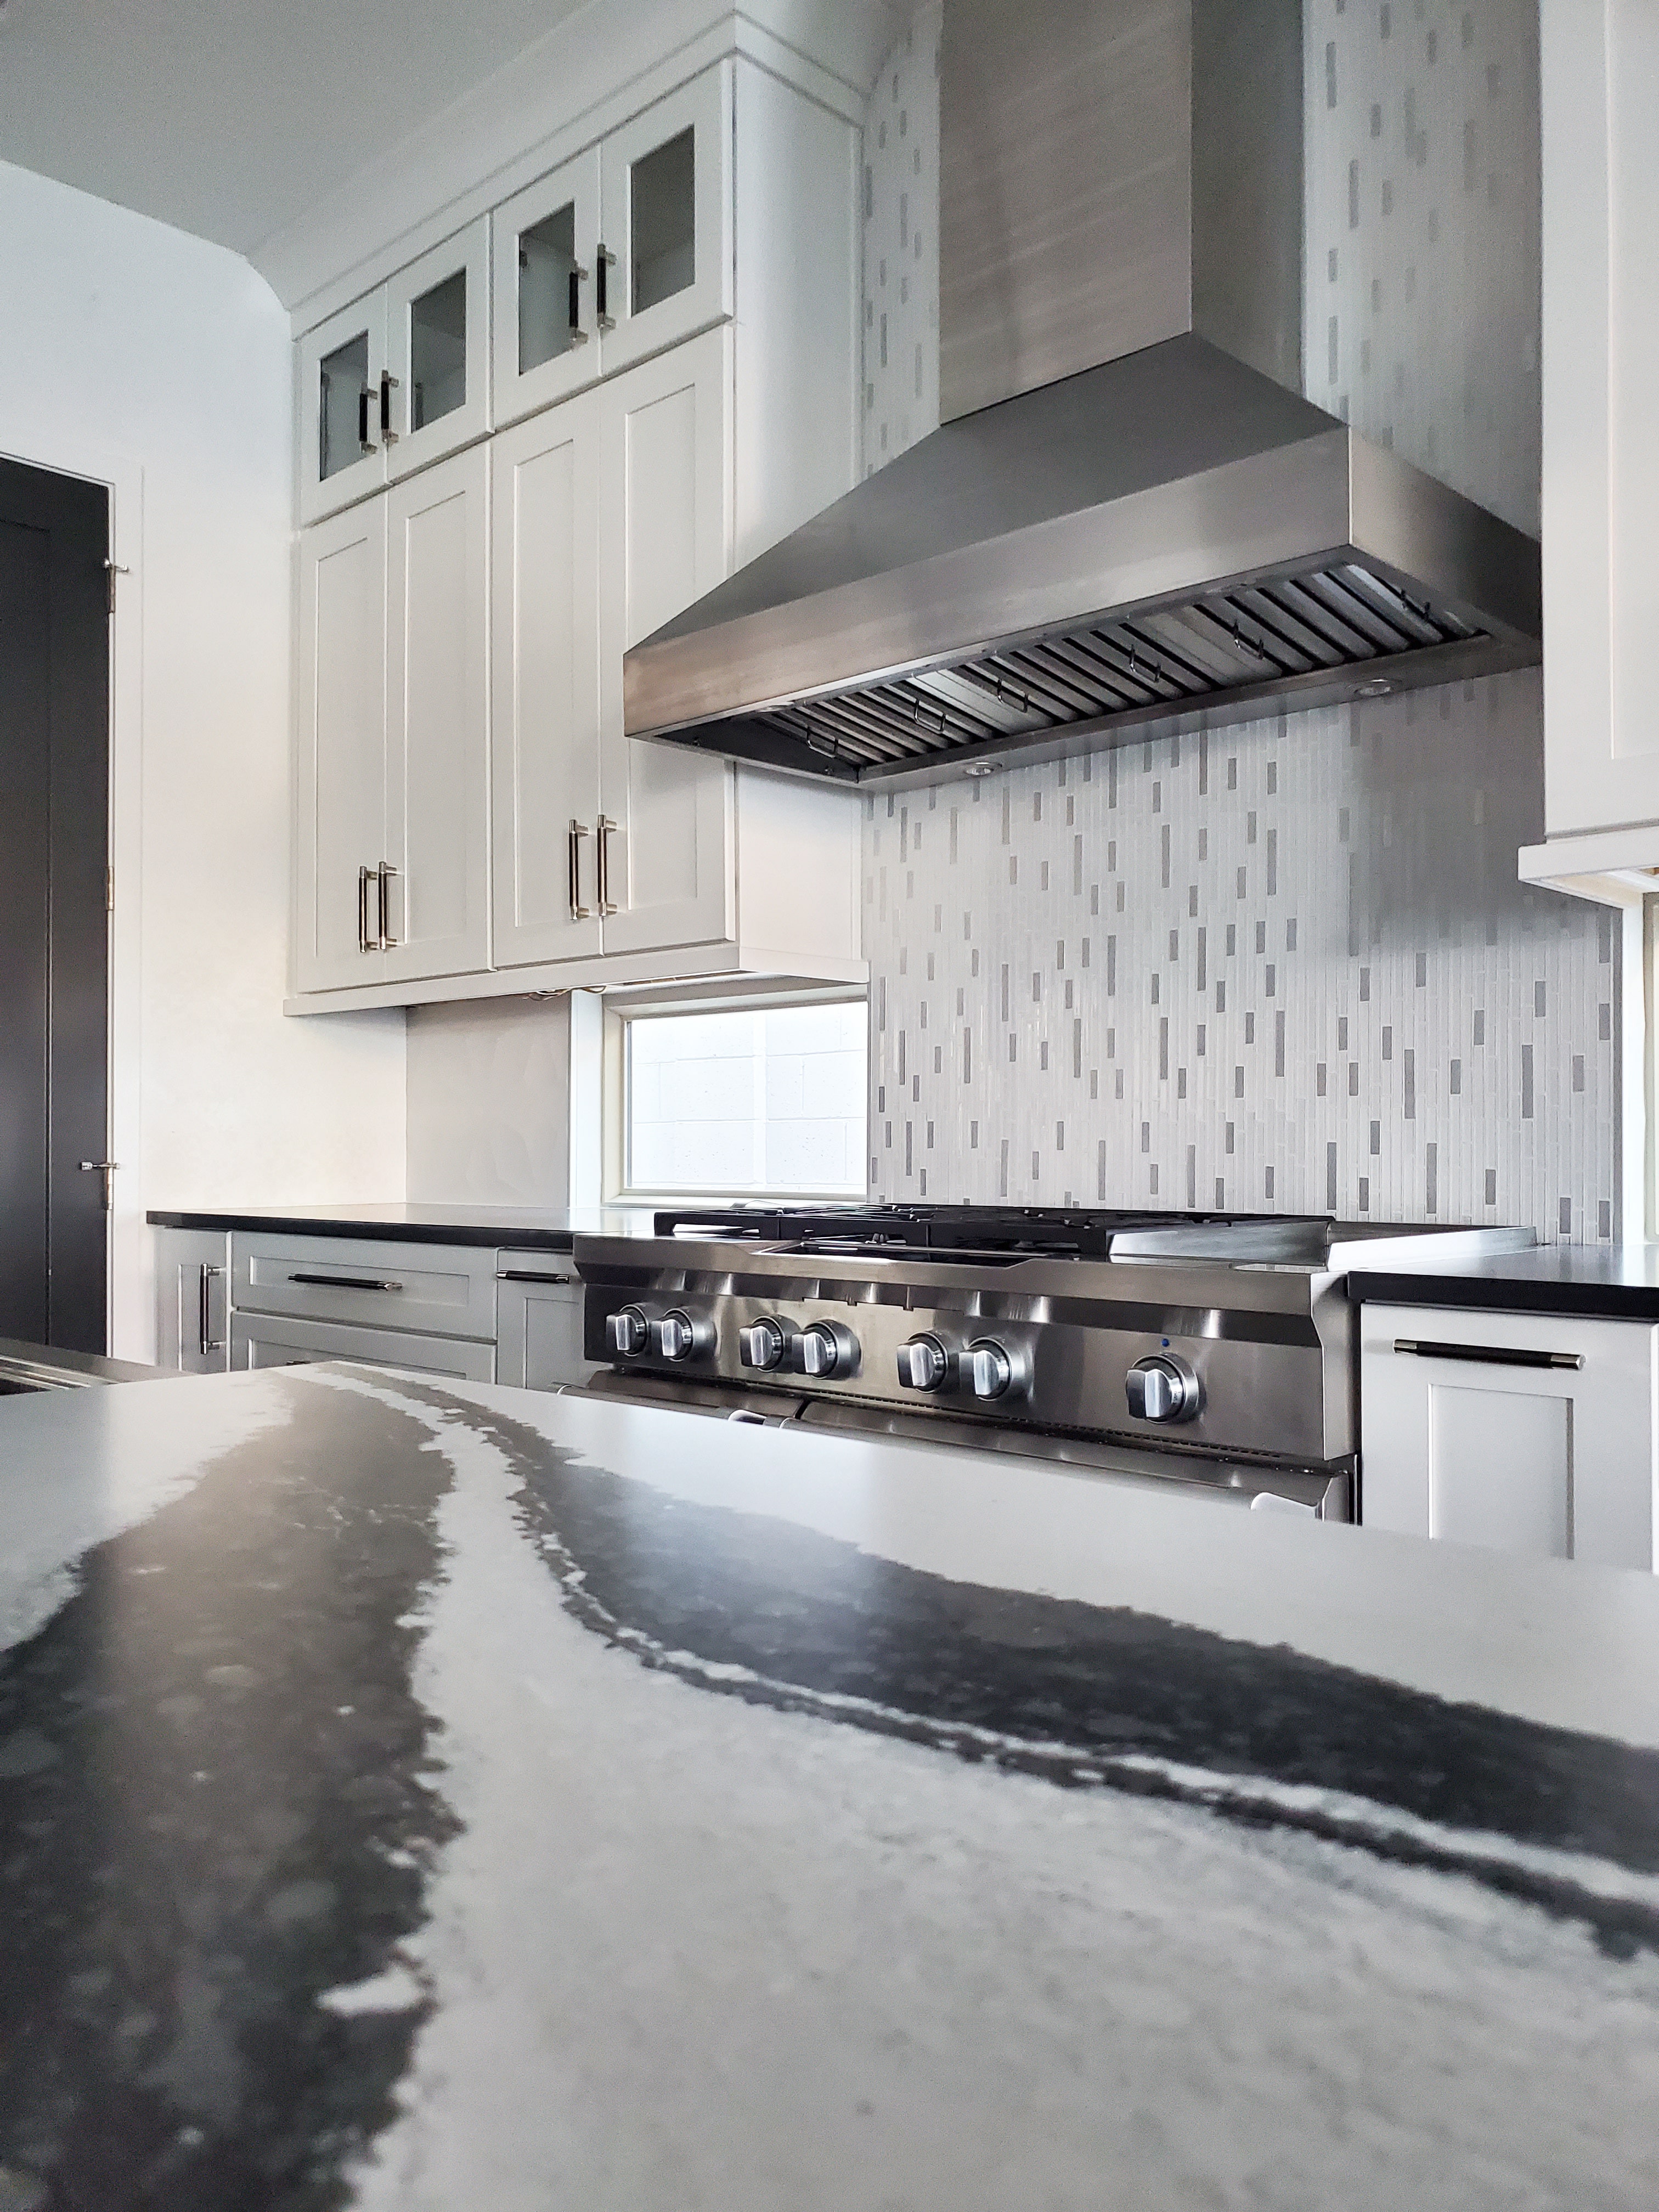 Sleek wall range hood with hidden buttons. Marbled counters and tiled backsplash. 